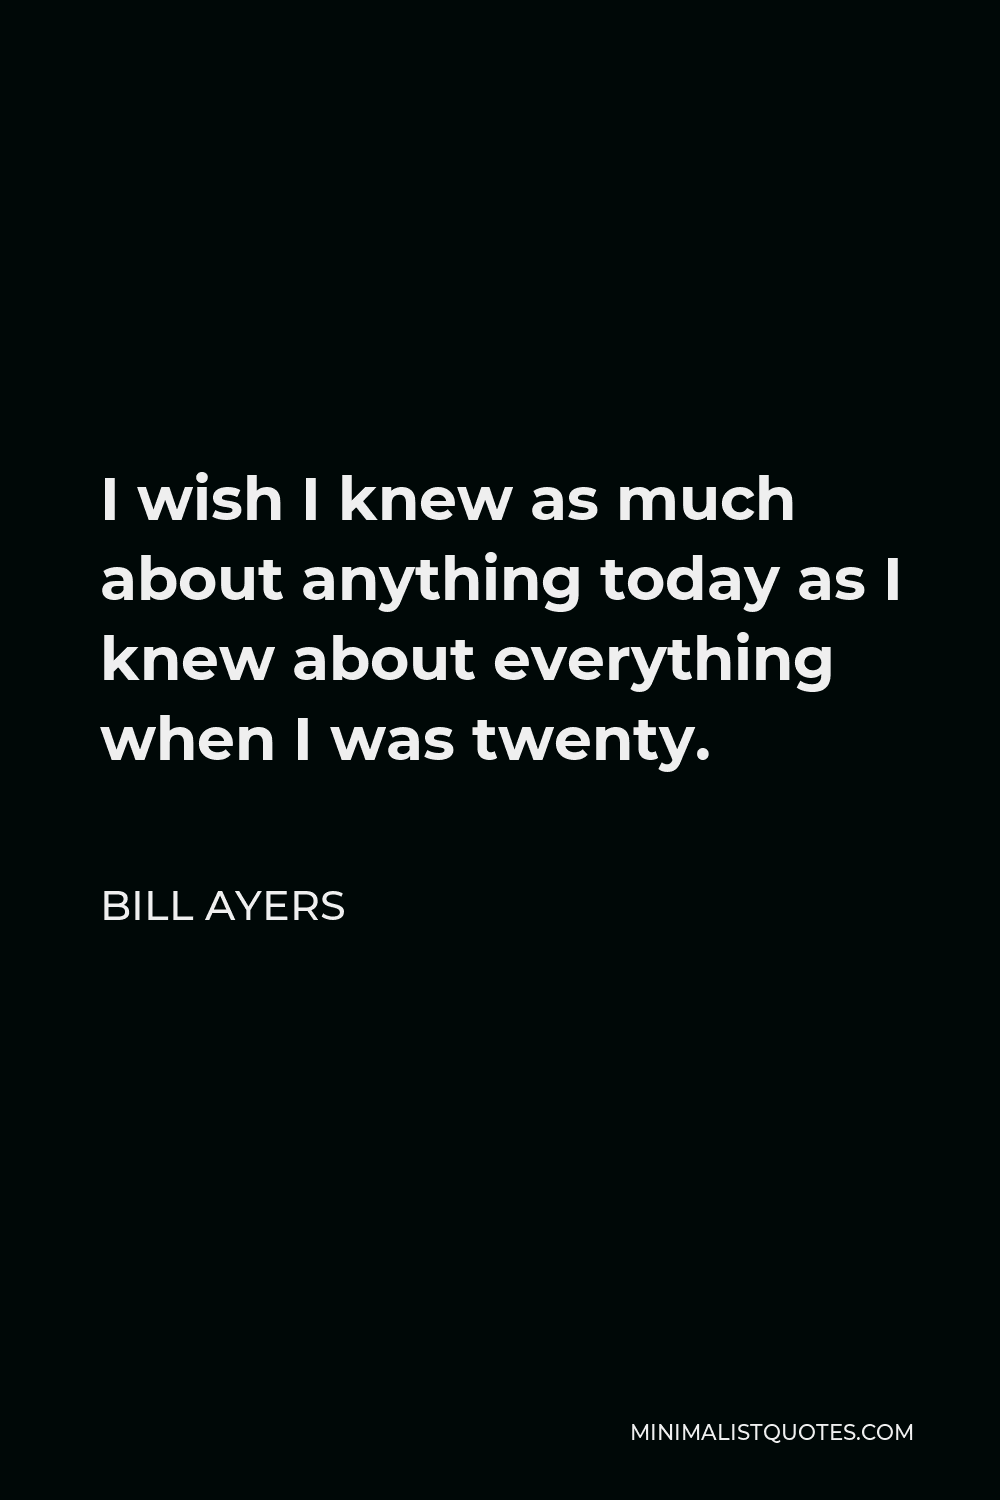 Bill Ayers Quote - I wish I knew as much about anything today as I knew about everything when I was twenty.